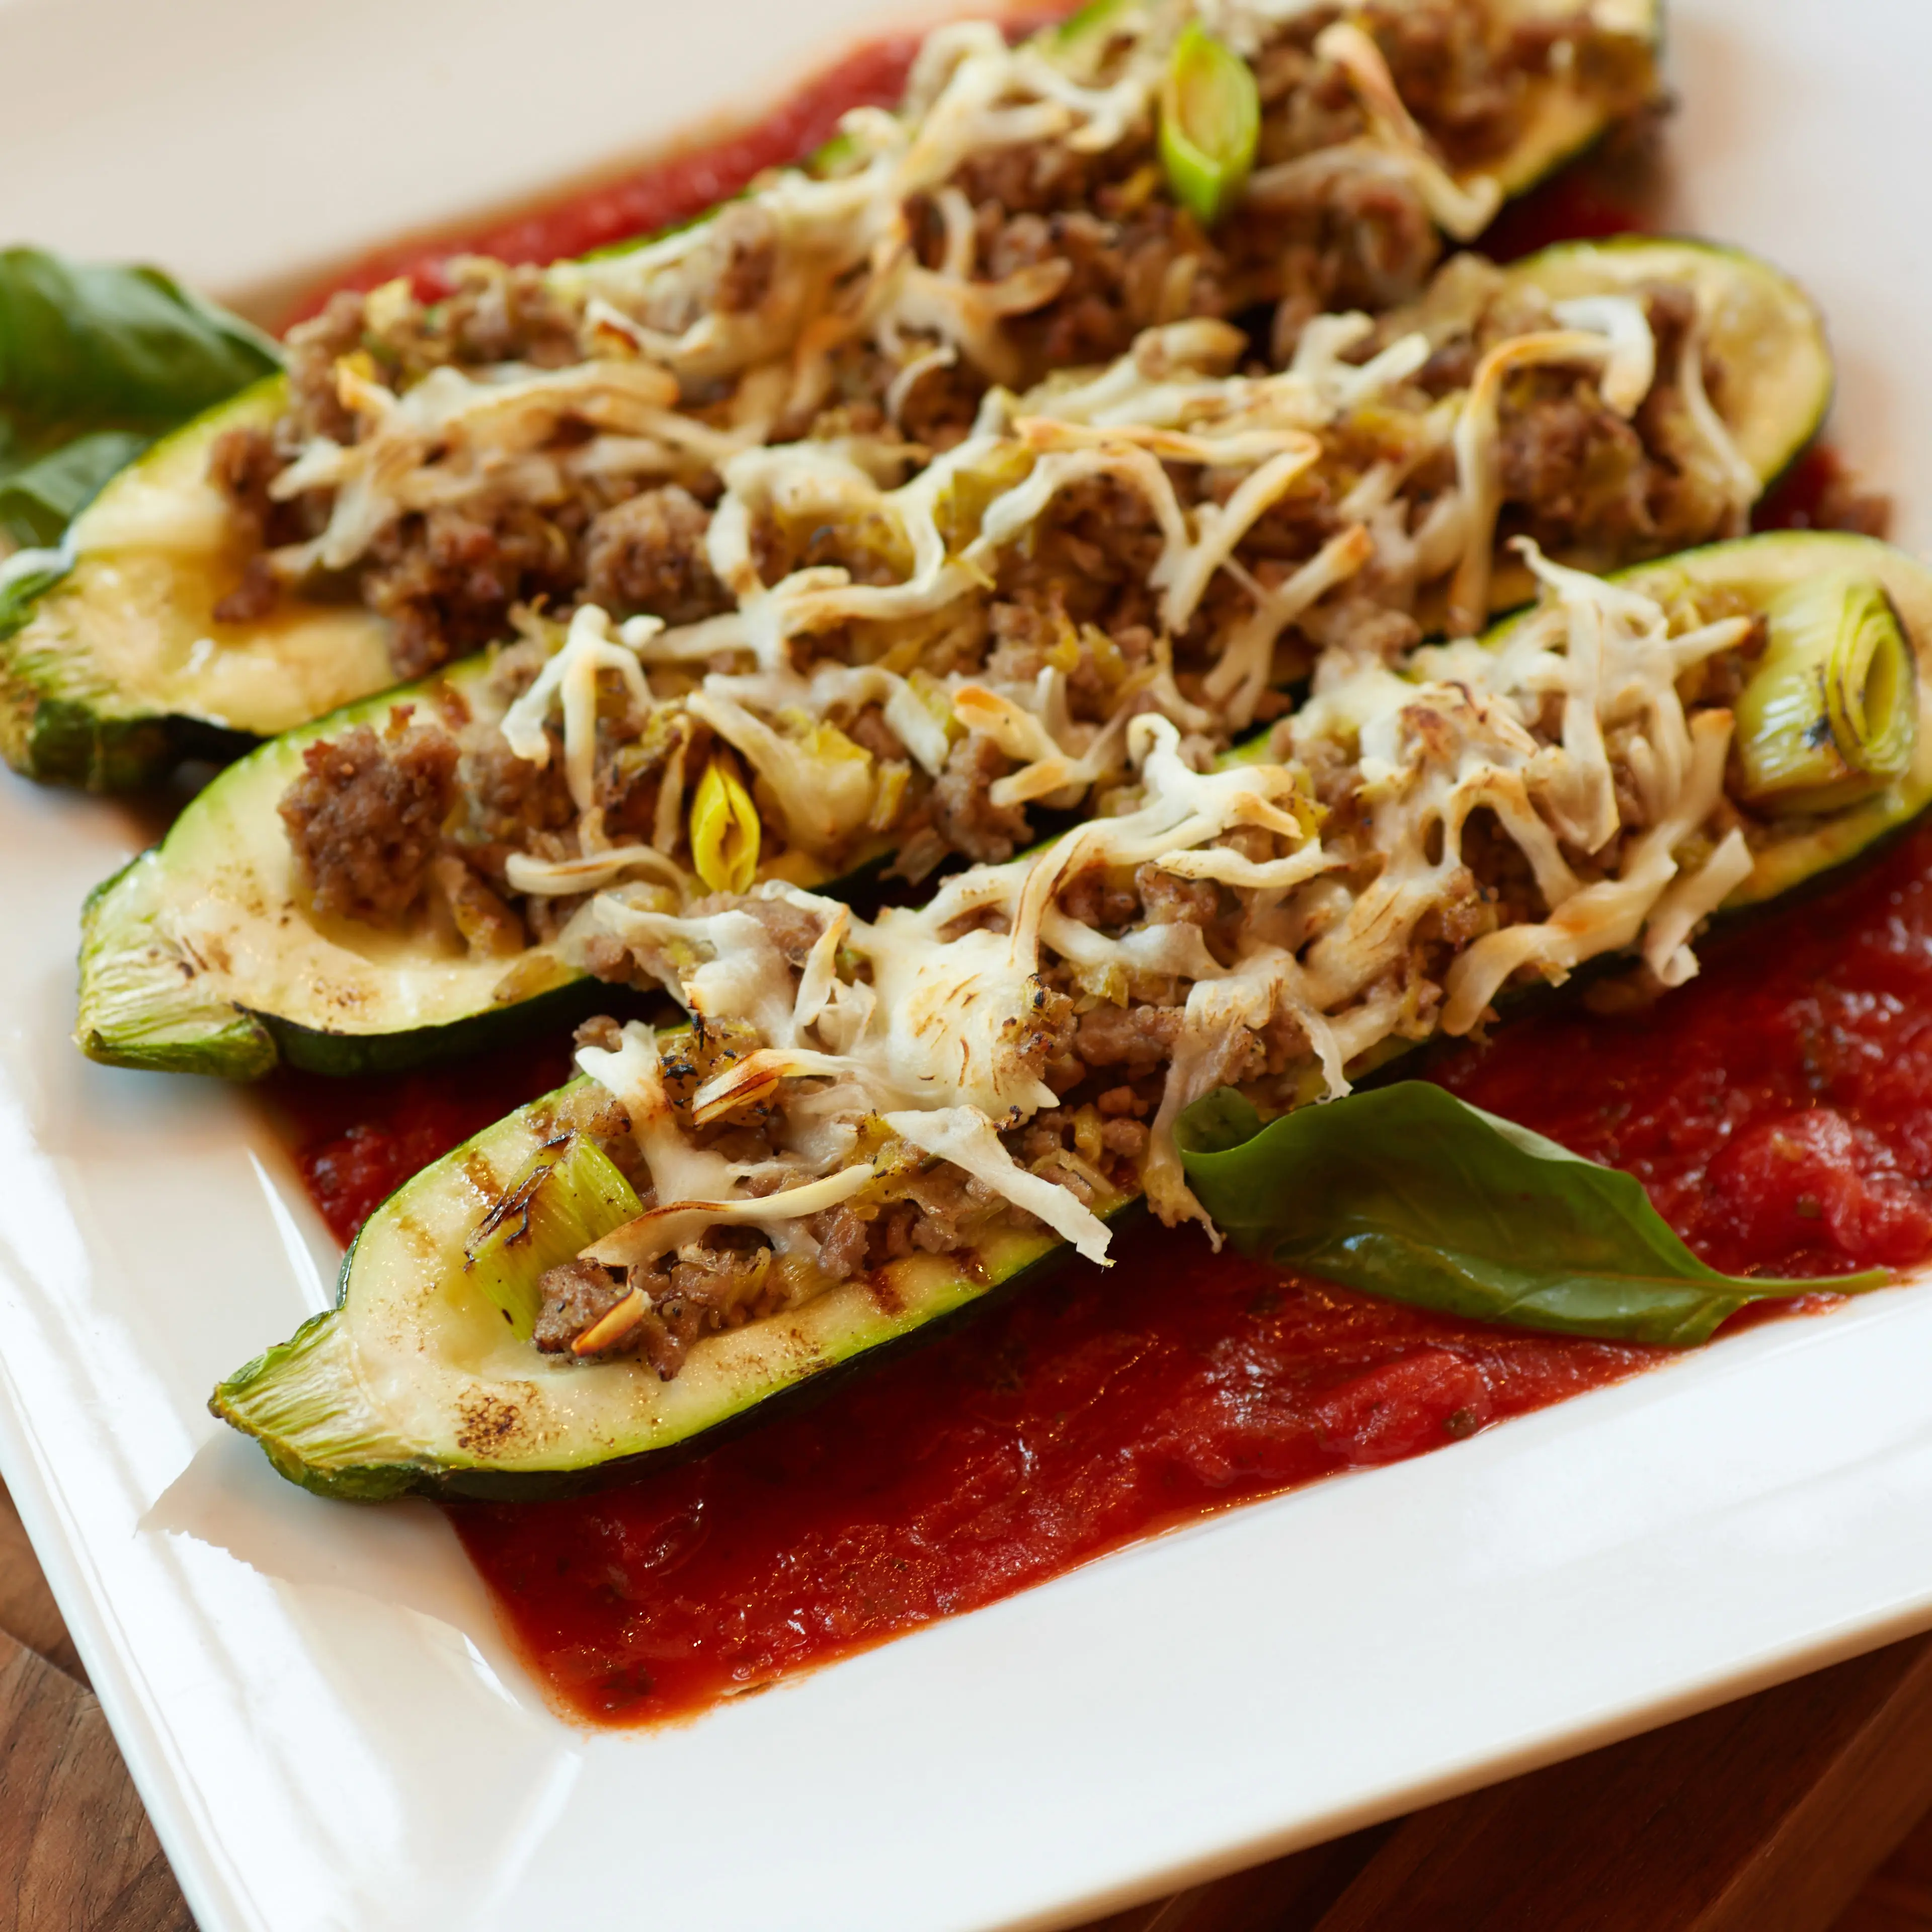 Stuffed zucchinis with veal and Mozzarella